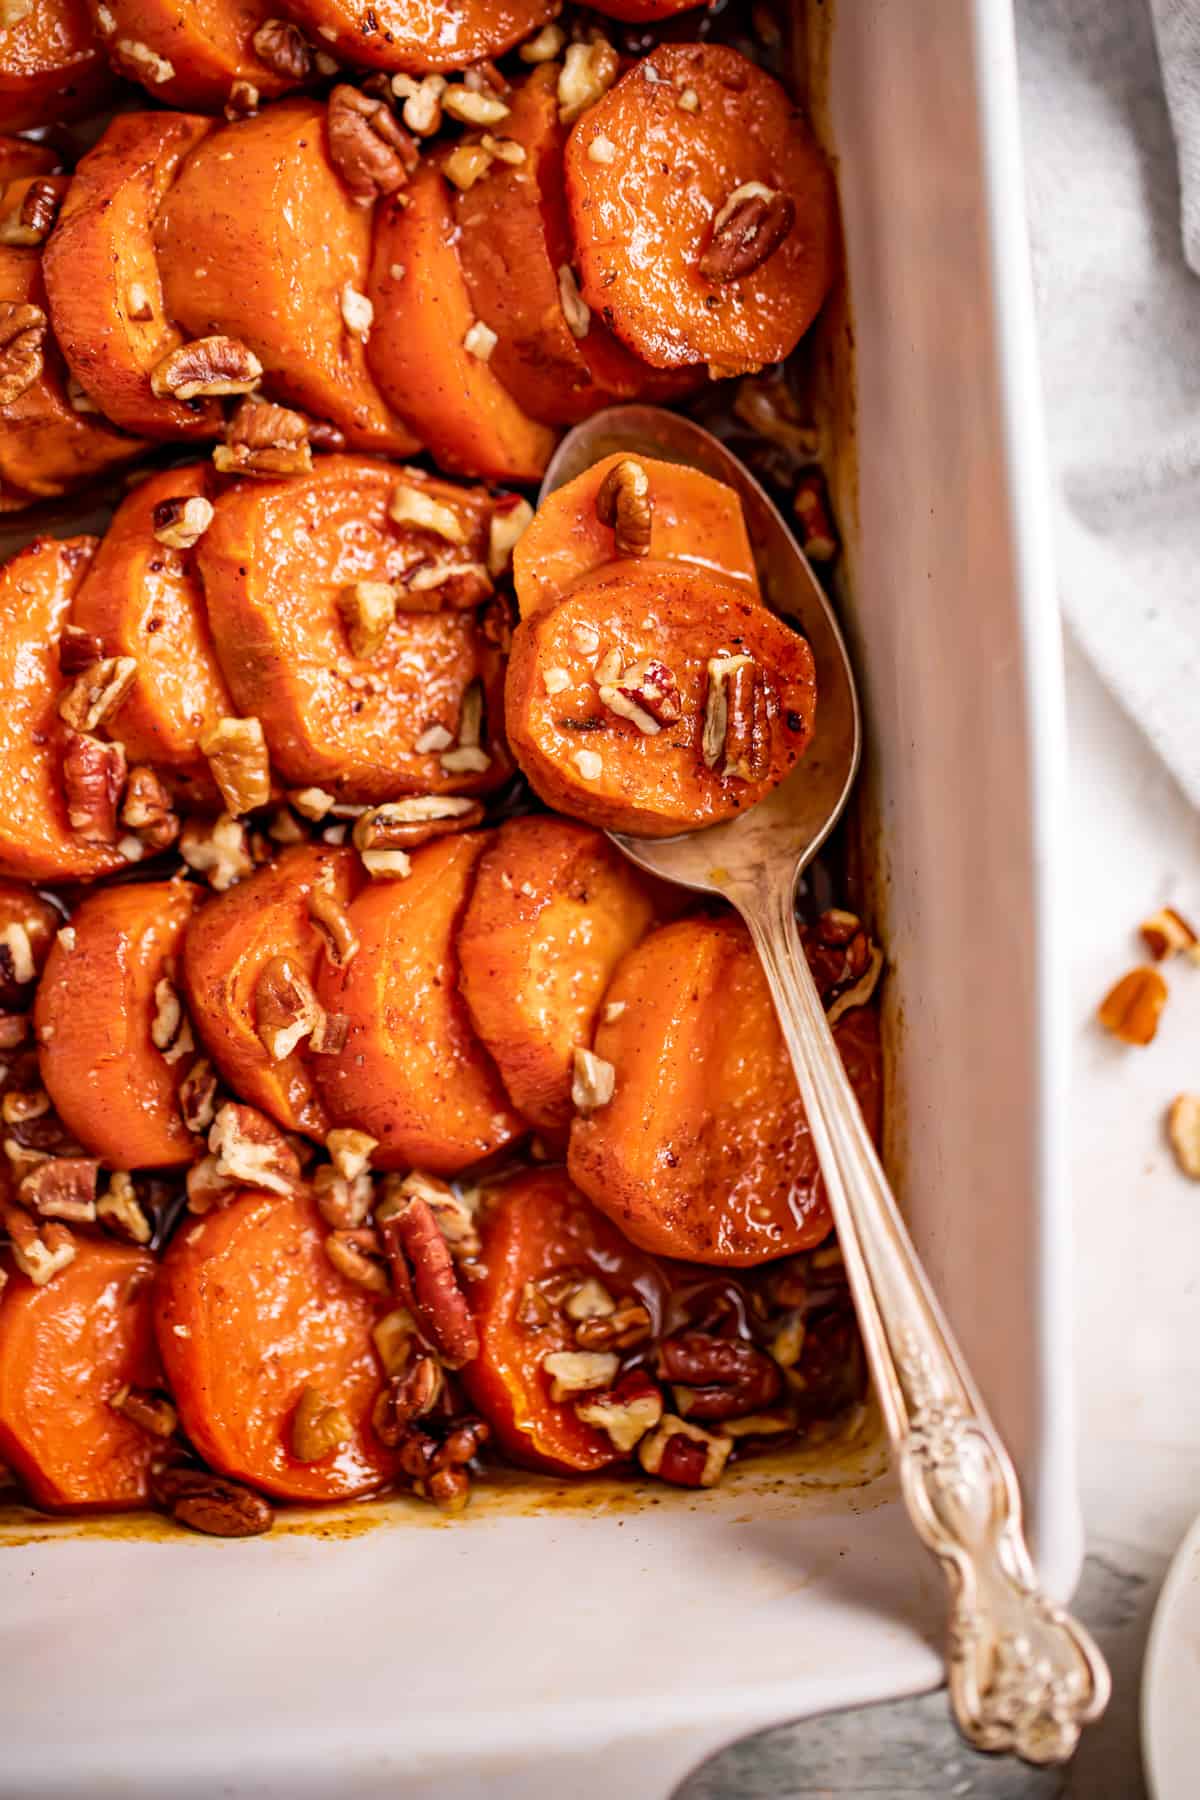 Baked Southern candied yams with pecans on top.